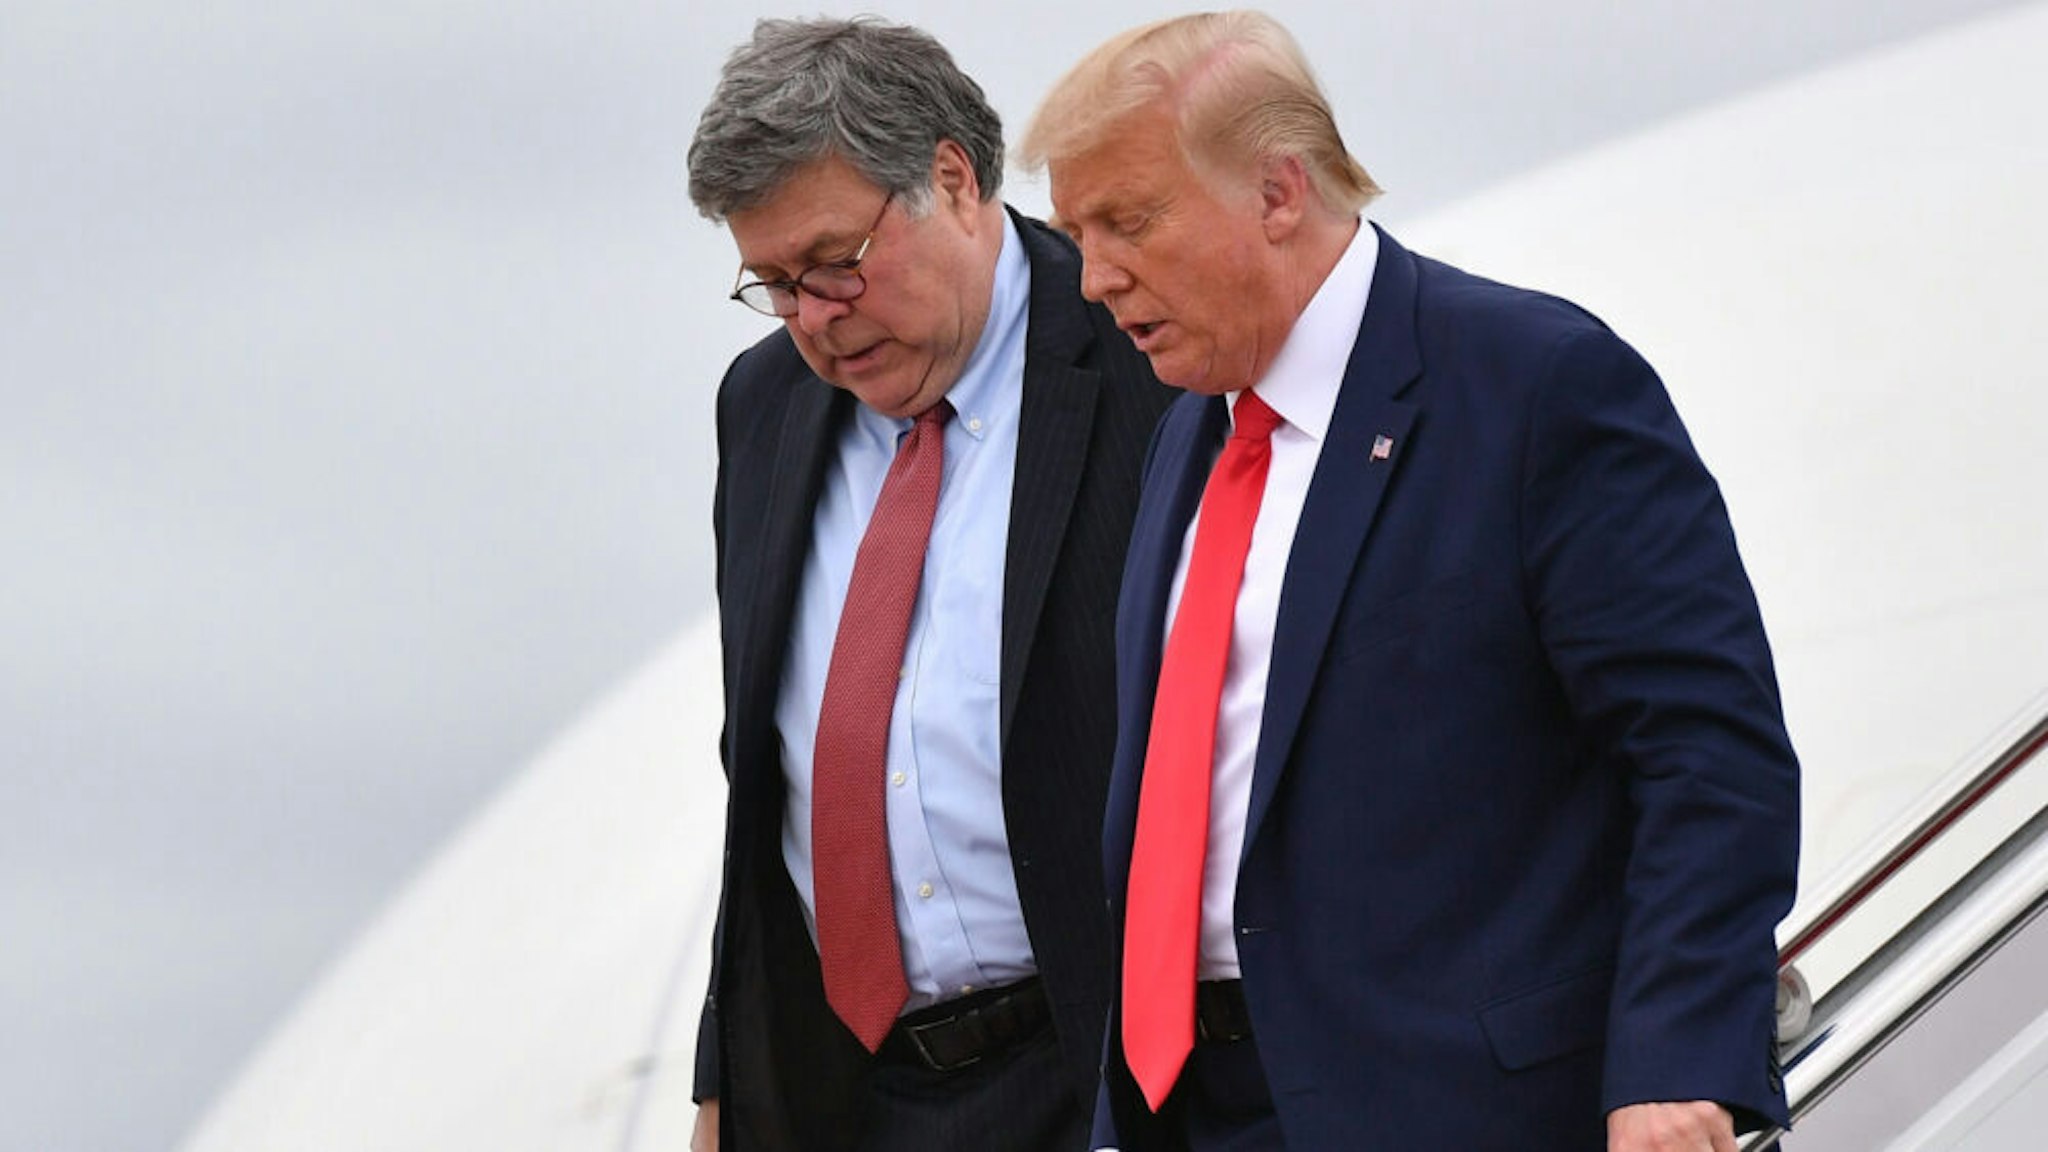 US President Donald Trump (R) and US Attorney General William Barr step off Air Force One upon arrival at Andrews Air Force Base in Maryland on September 1, 2020. - US President Donald Trump said September 1, 2020 on a visit to protest-hit Kenosha, Wisconsin that recent anti-police demonstrations in the city were acts of "domestic terror" committed by violent mobs.